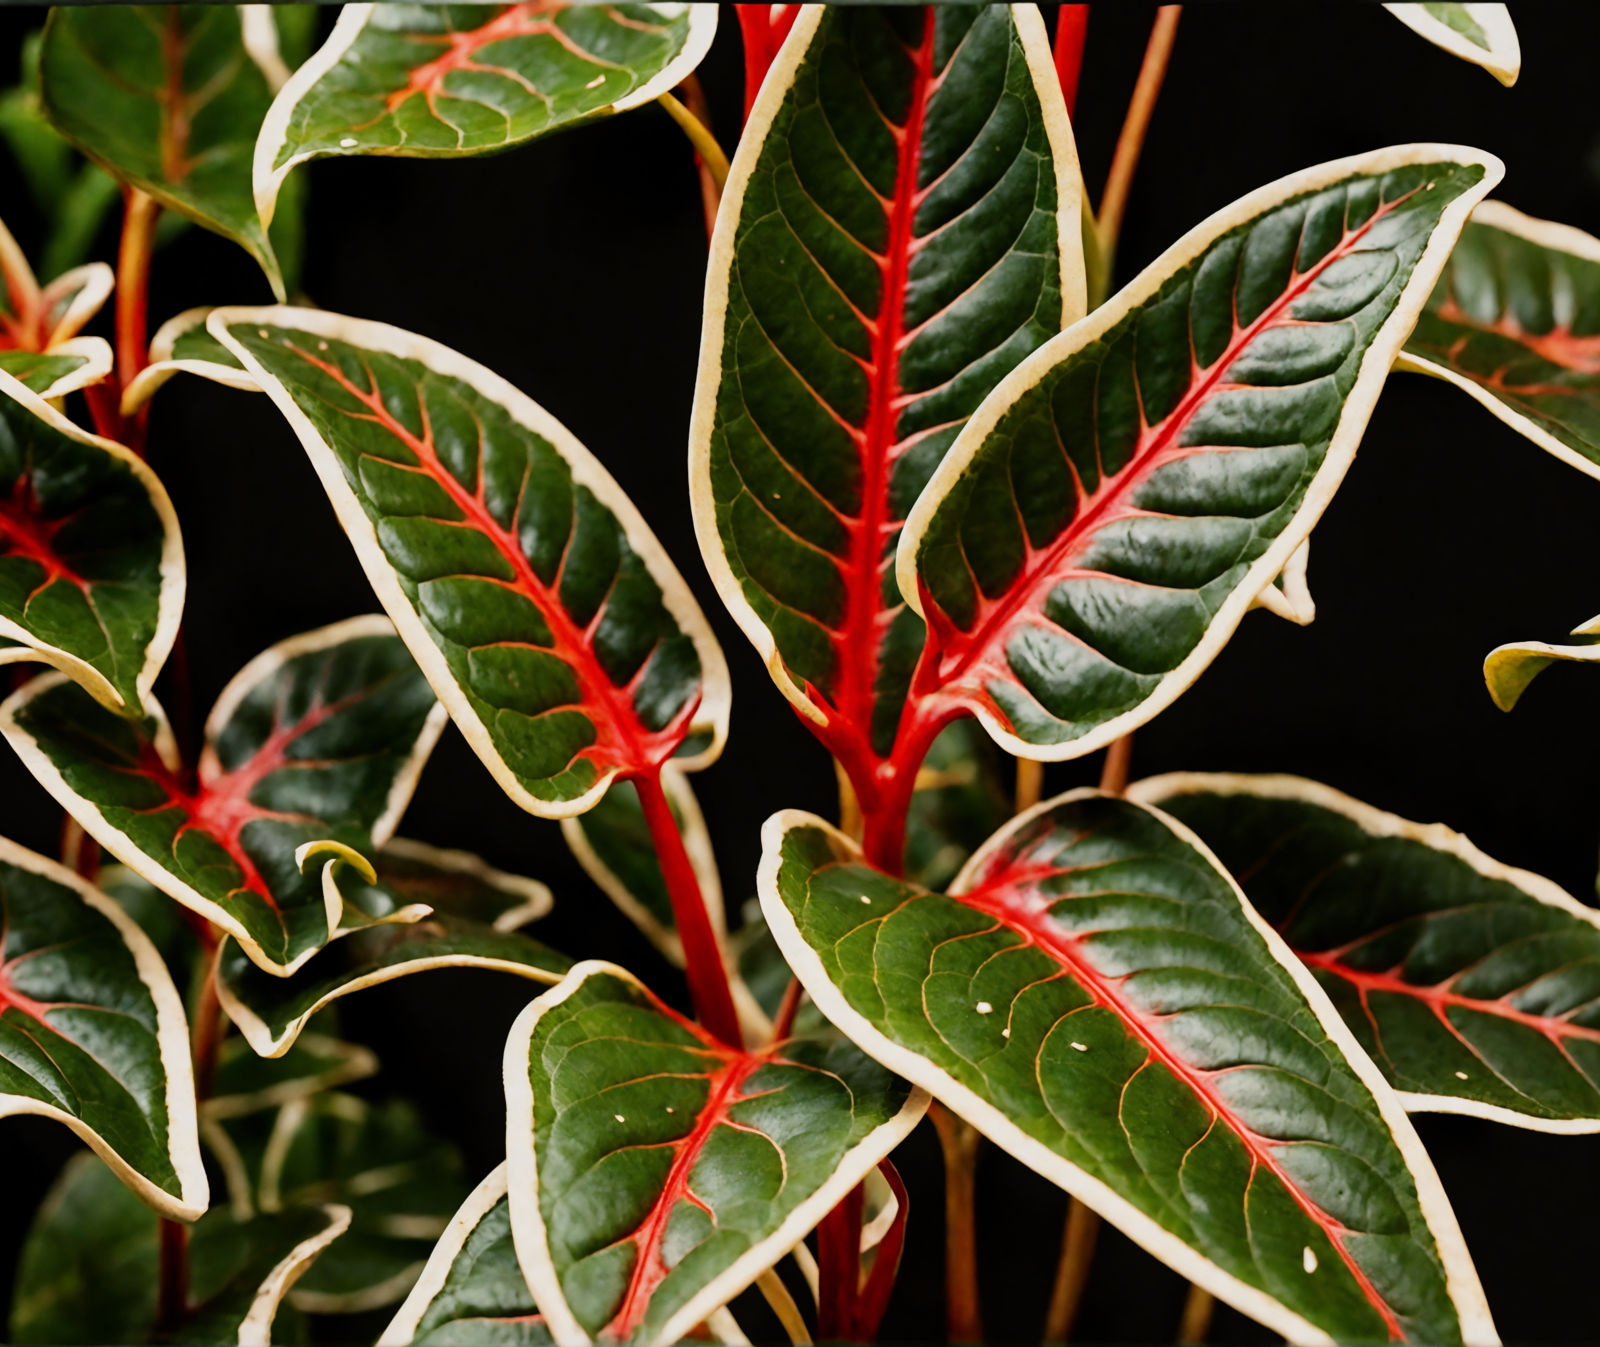 Caladium bicolor with vibrant green and red leaves in a planter, clear indoor lighting, dark background.